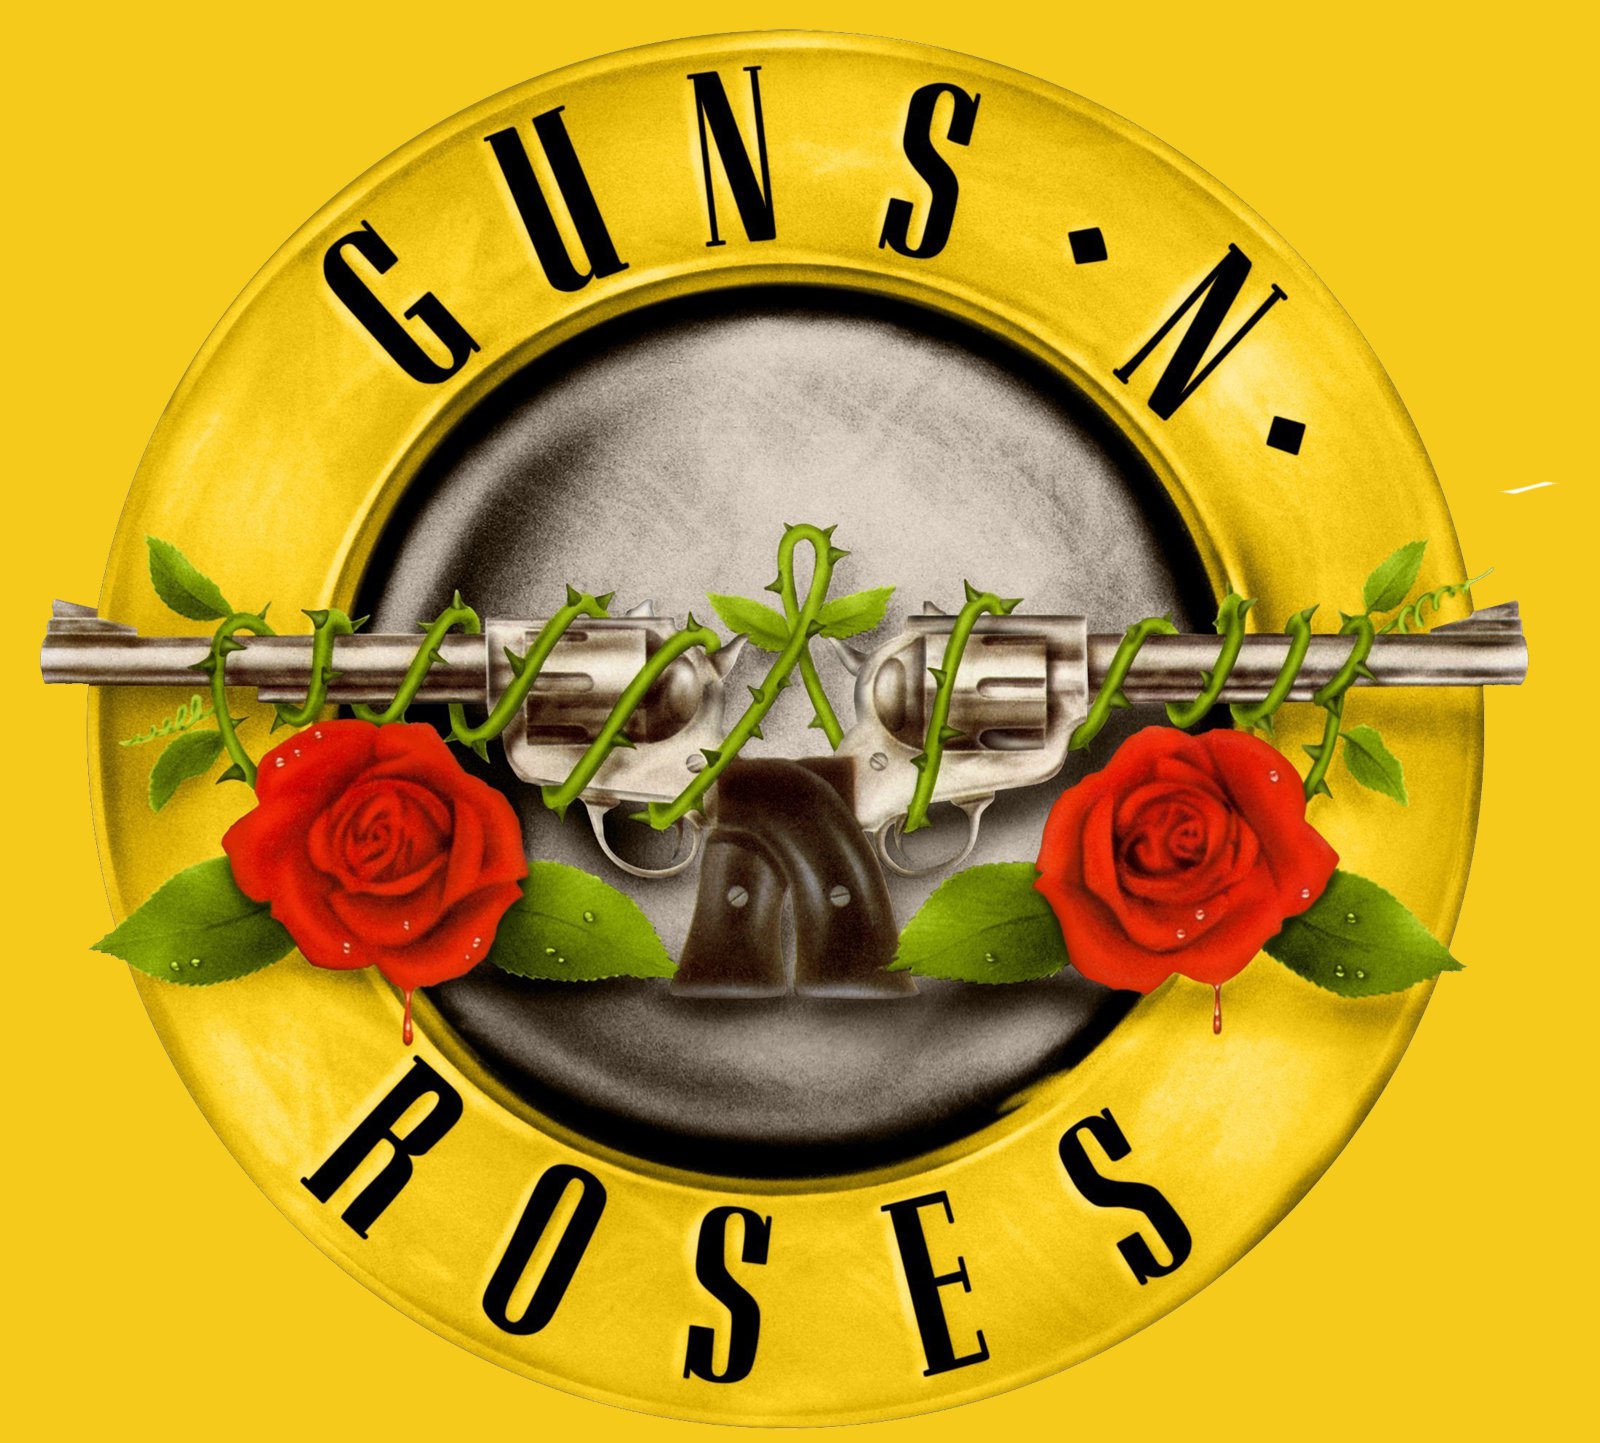 Meaning Guns N' Roses logo and symbol | history and evolution